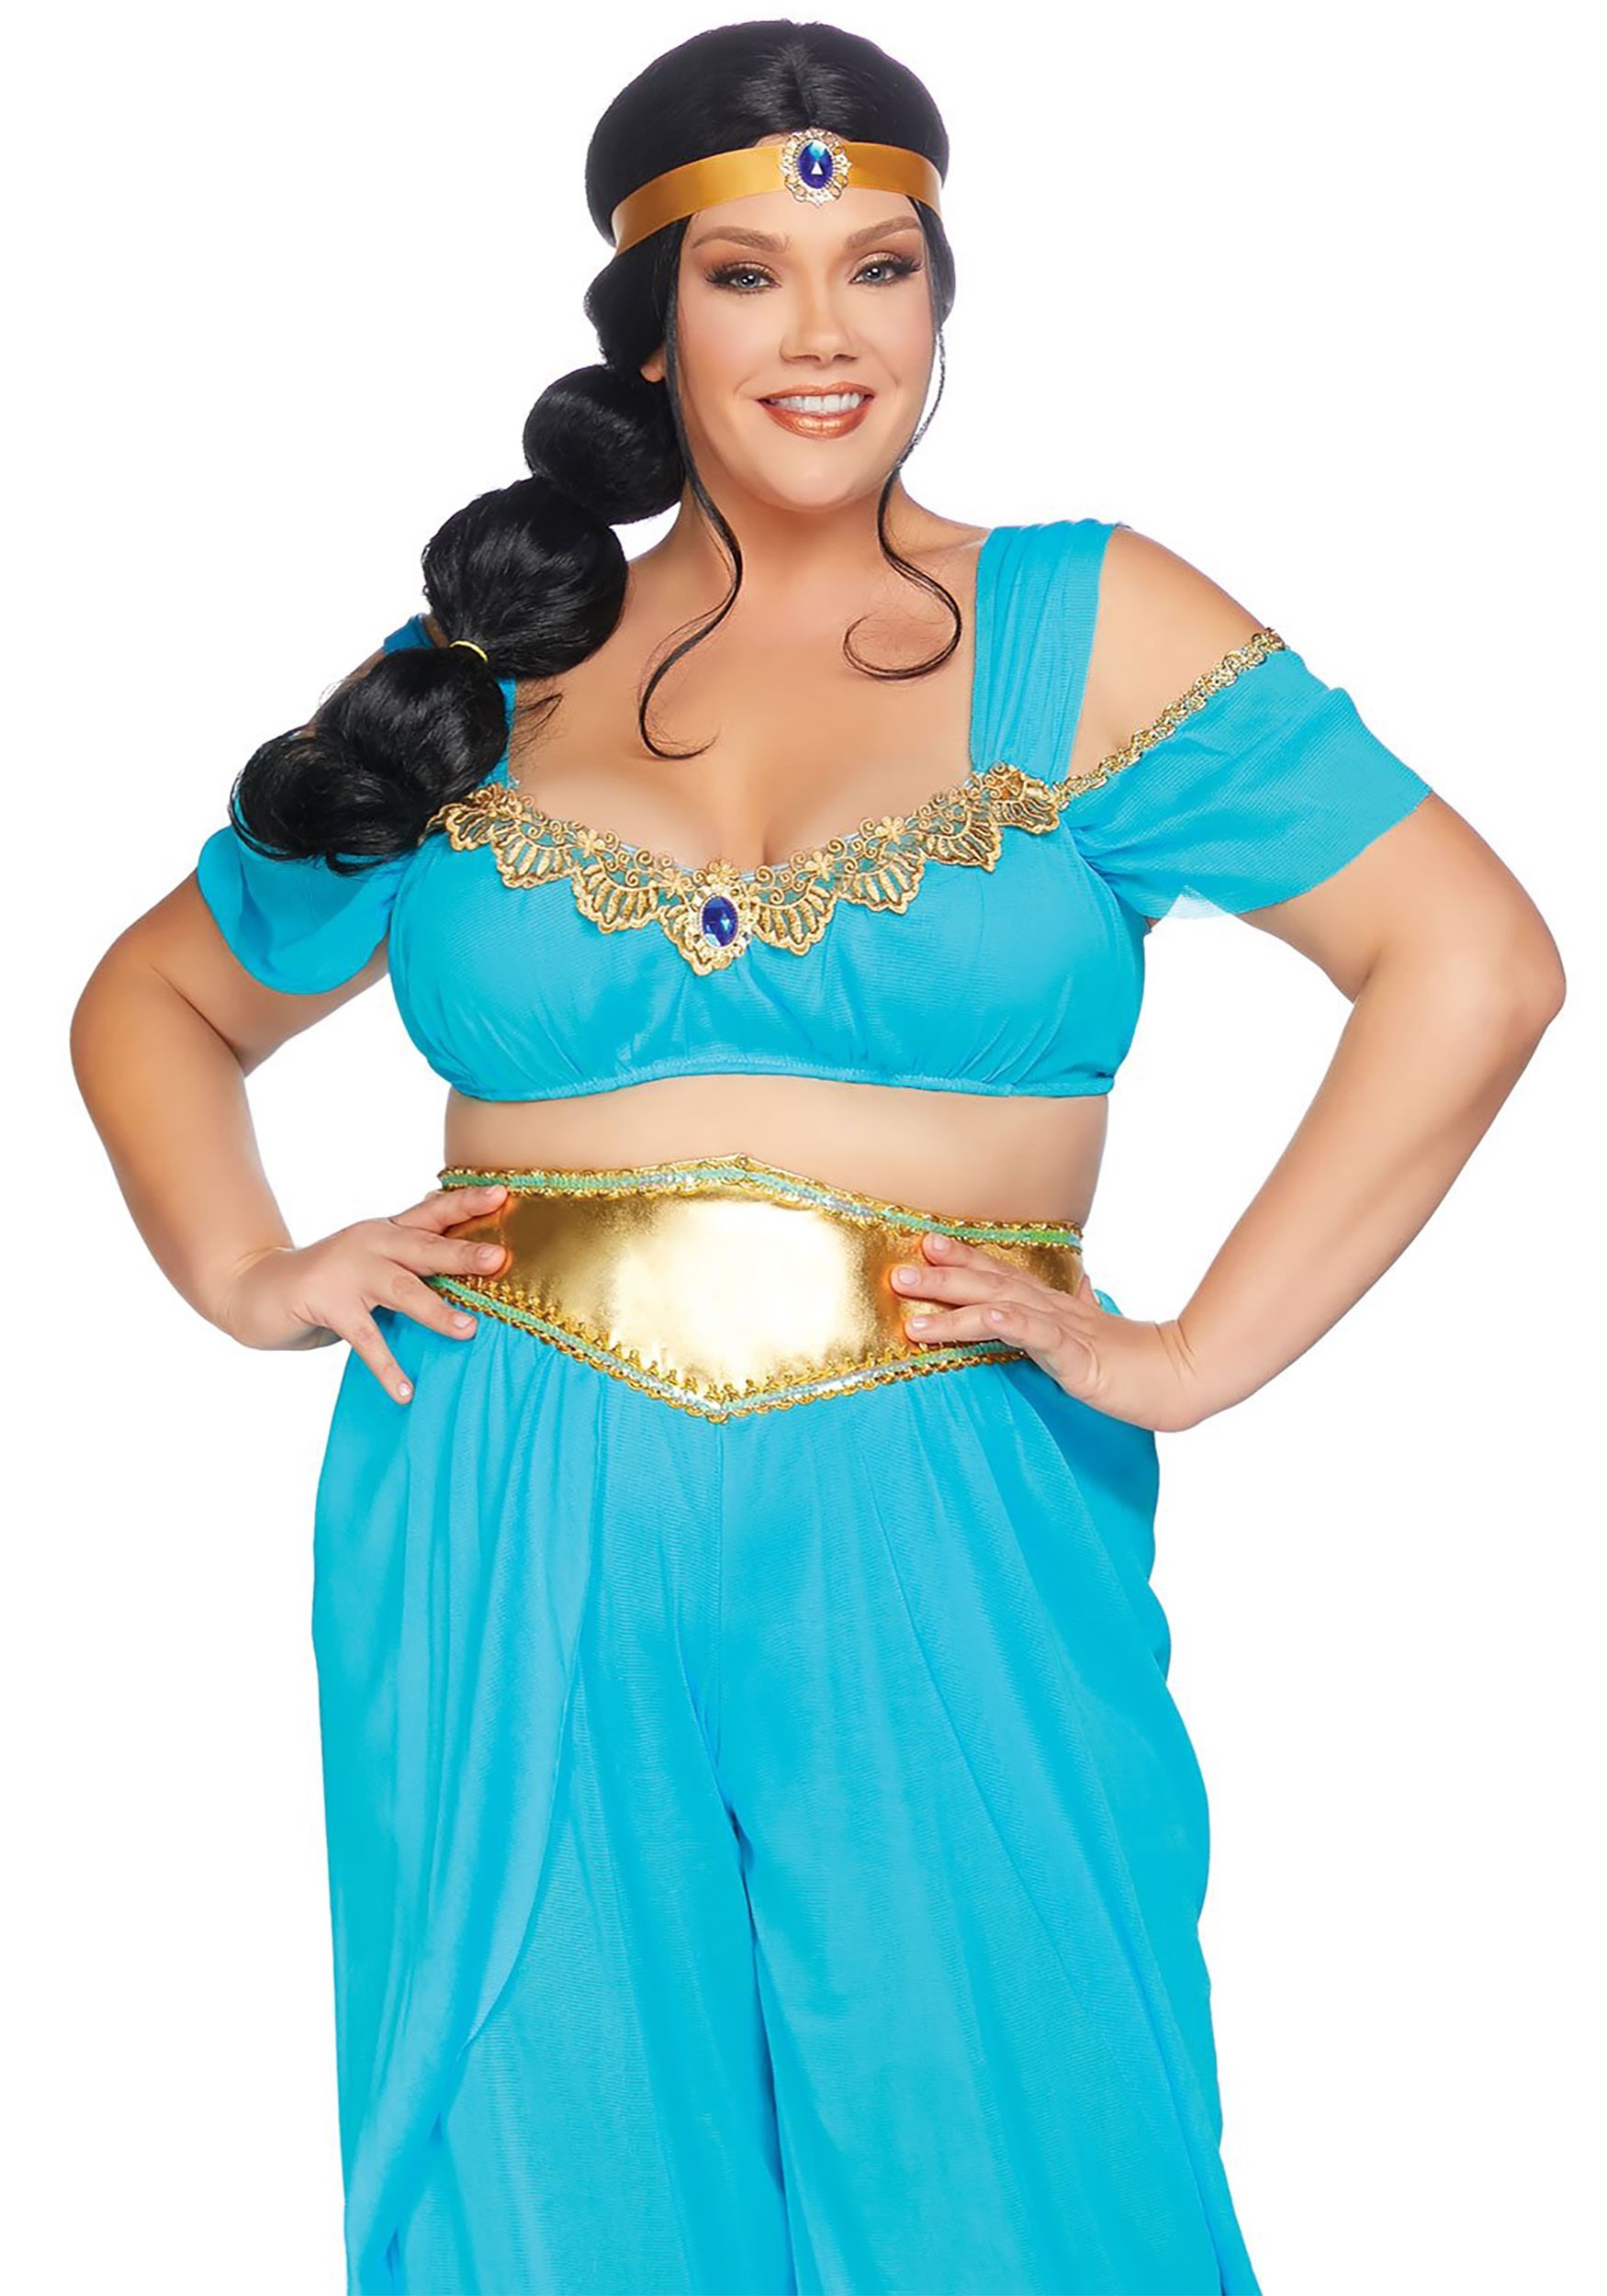 Plus Size Sexy Desert Princess Costume for Adults photo photo